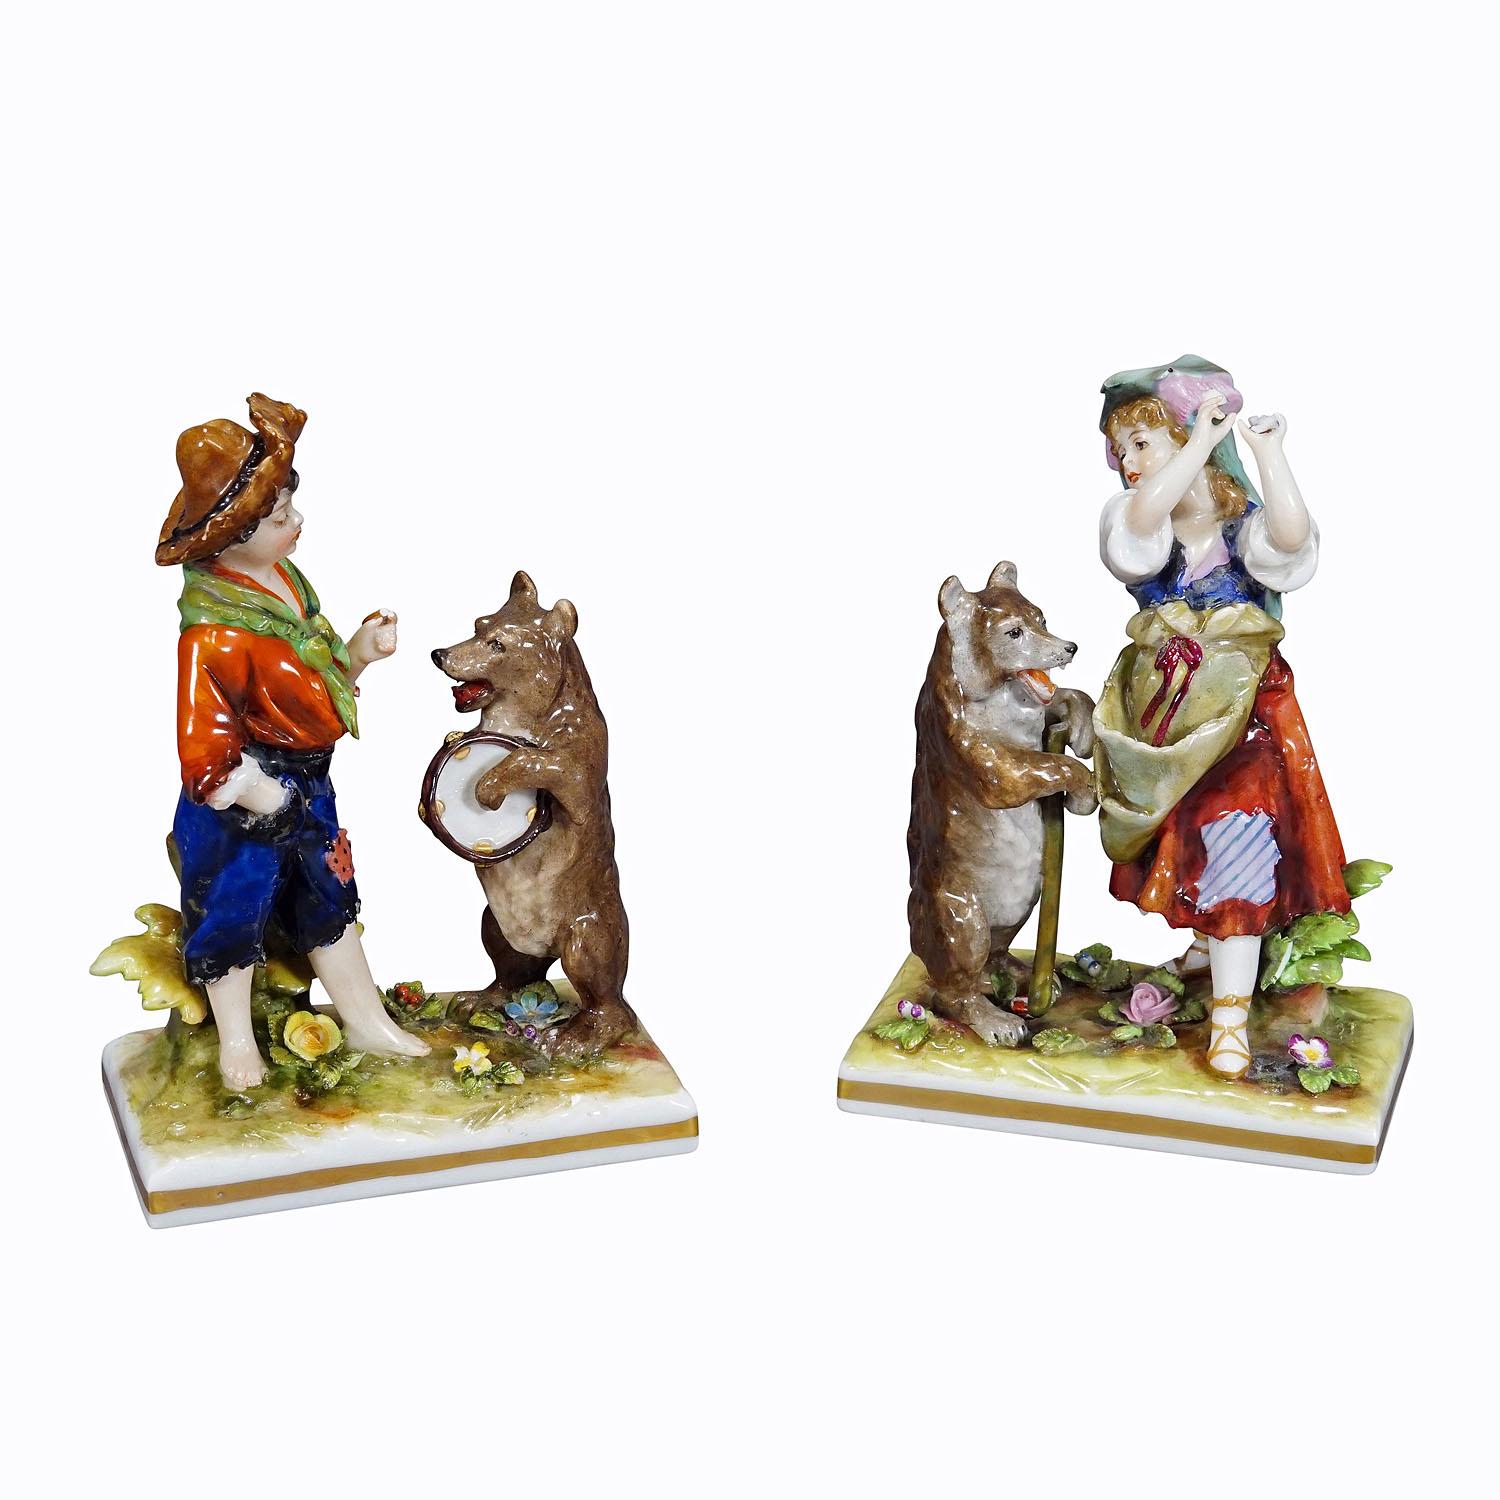 Volkstedt Porcellain Figurines Children with Bears
Item e7266
A group of figures with children playing with bear cubs. Made in Germany by the Aelteste Volksstedt porcelain factory.
White body, polychrome painted, with blue underglaze mark, N with